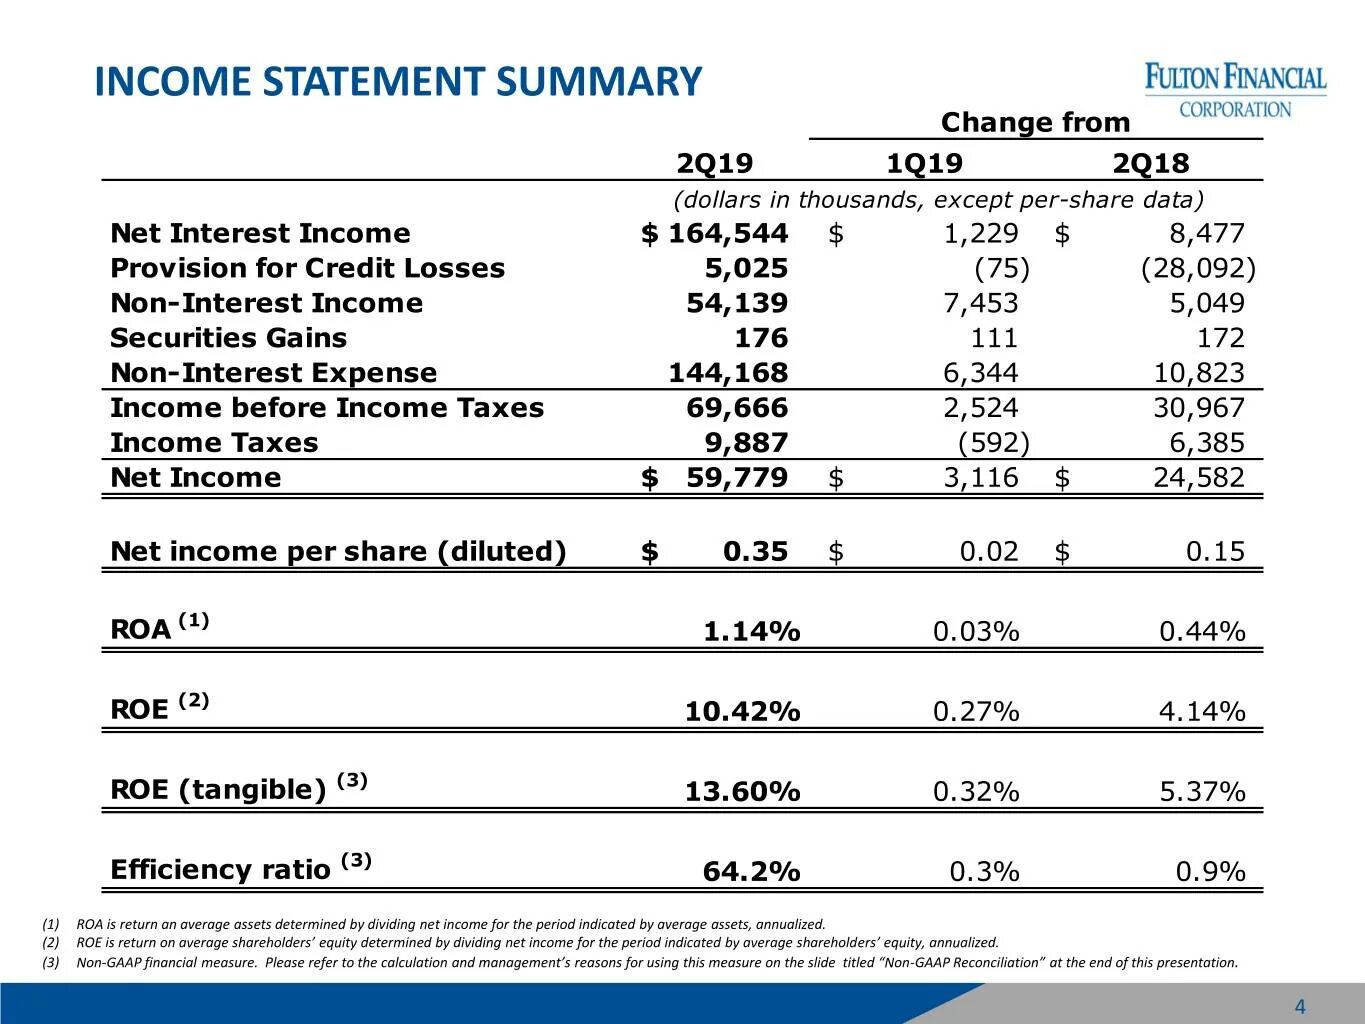 Income Statement. Statement of Financial Results. Income Statement provisions. Interest Income Statement.